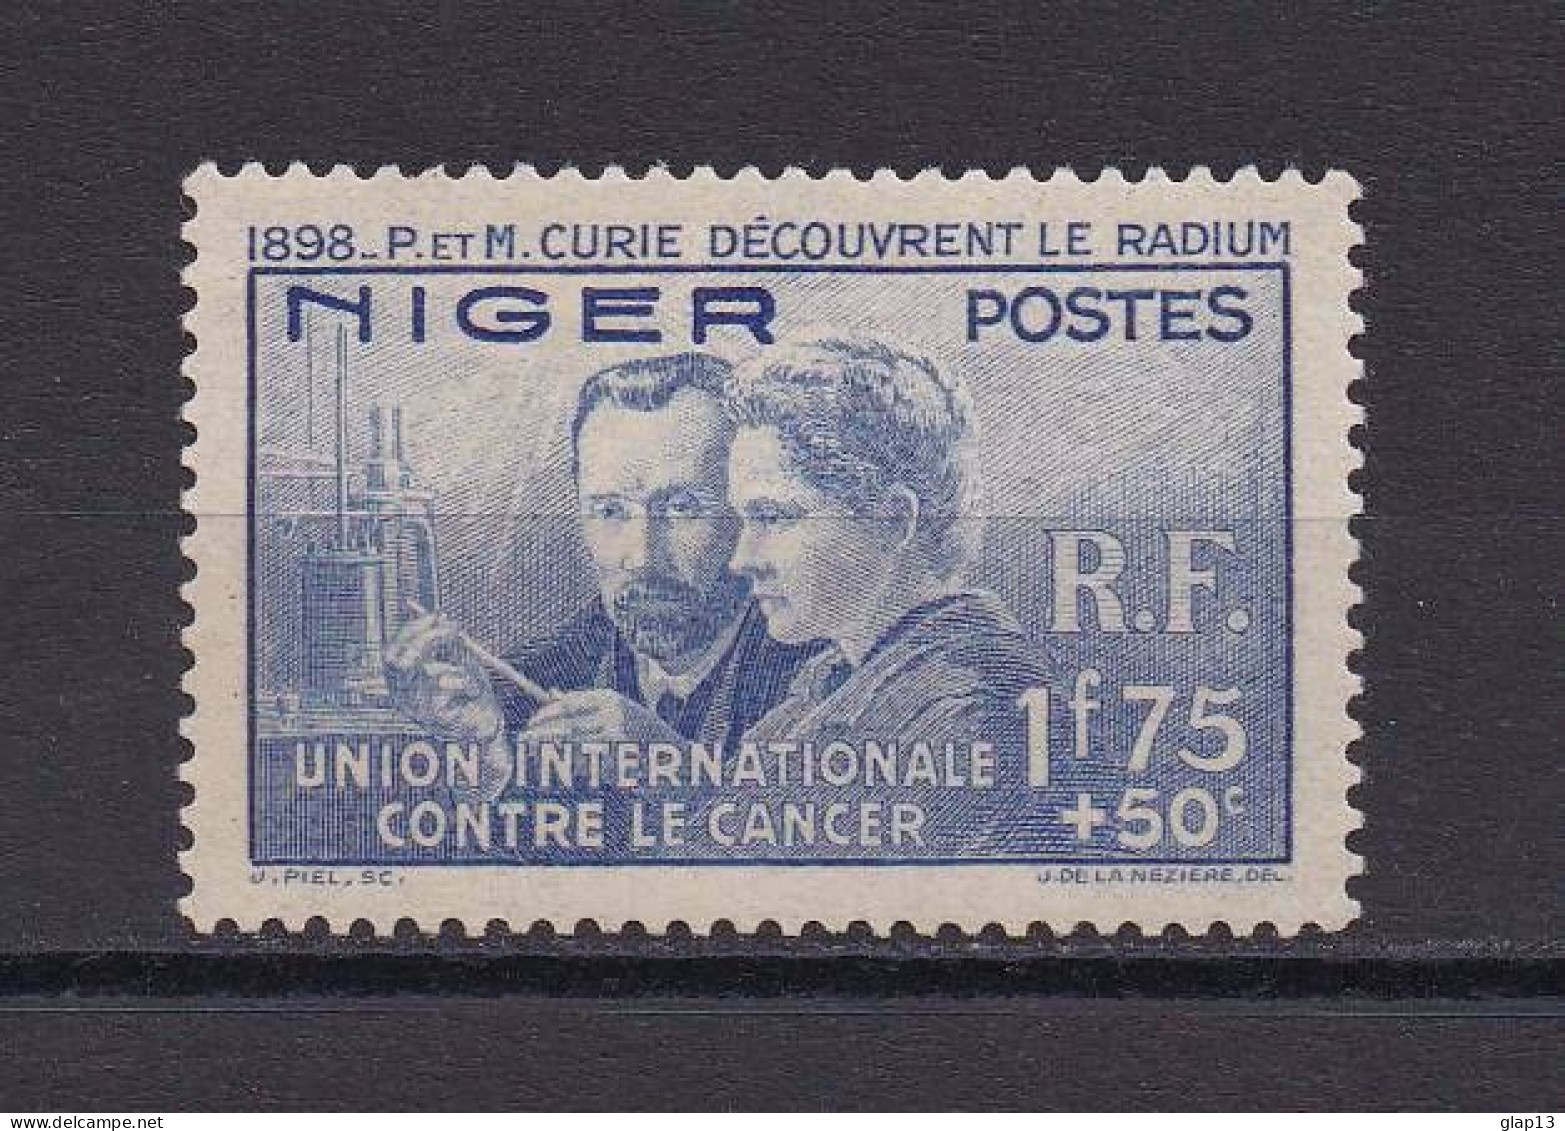 NIGER 1938 TIMBRE N°63 NEUF** PIERRE ET MARIE CURIE - Neufs